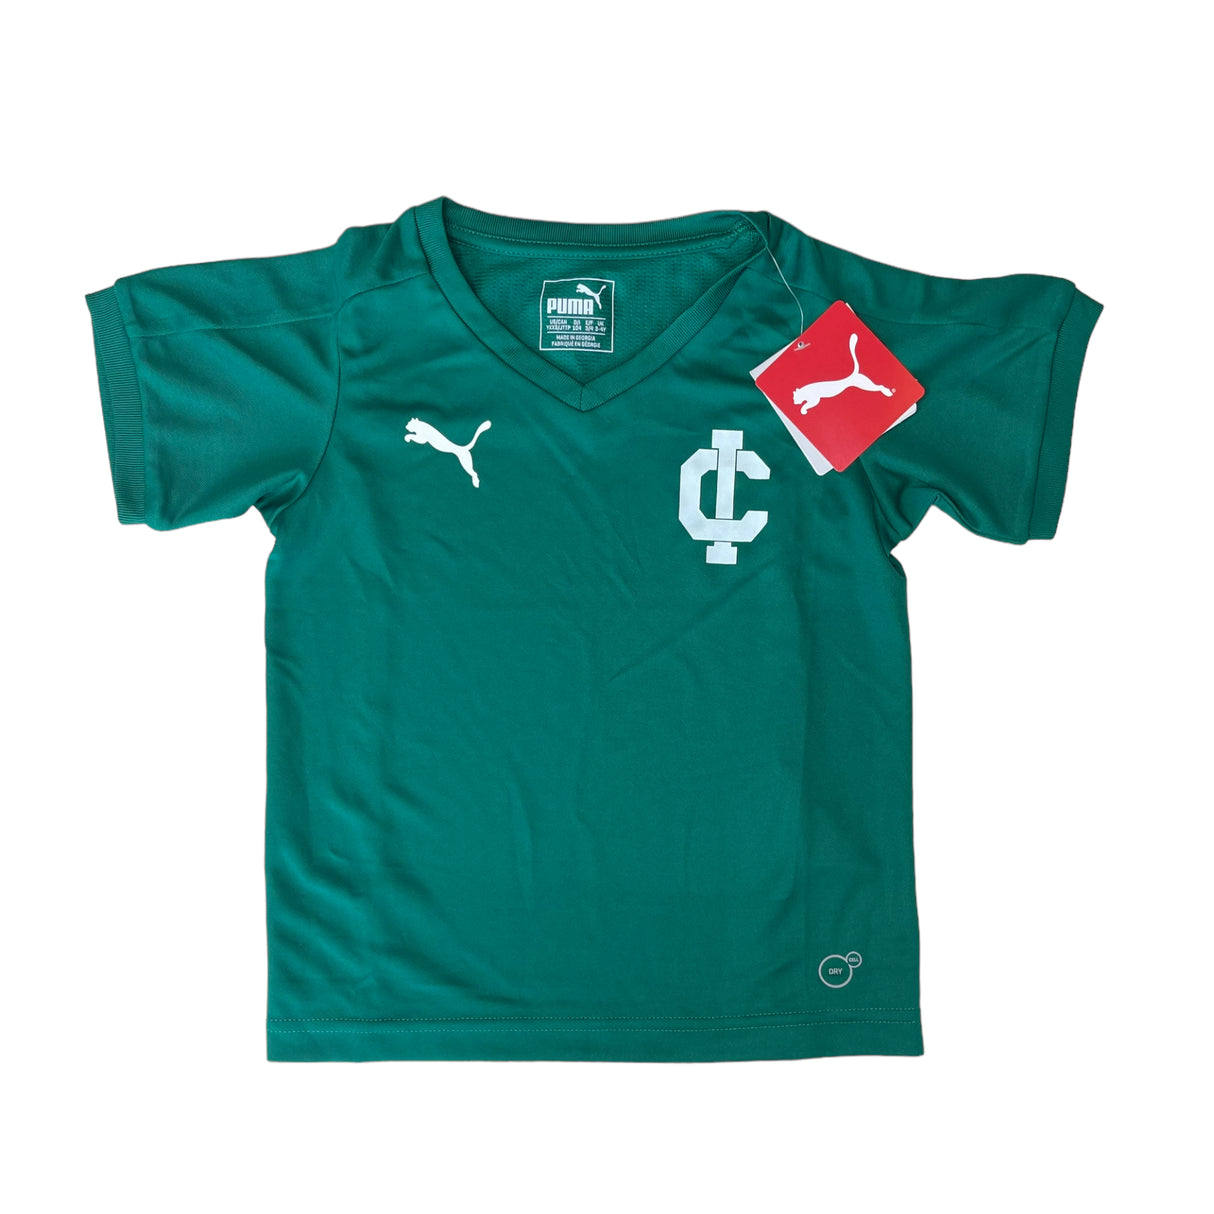 A Second Chance - Puma Shirt 4Y Brand New - Delivery All Over Lebanon